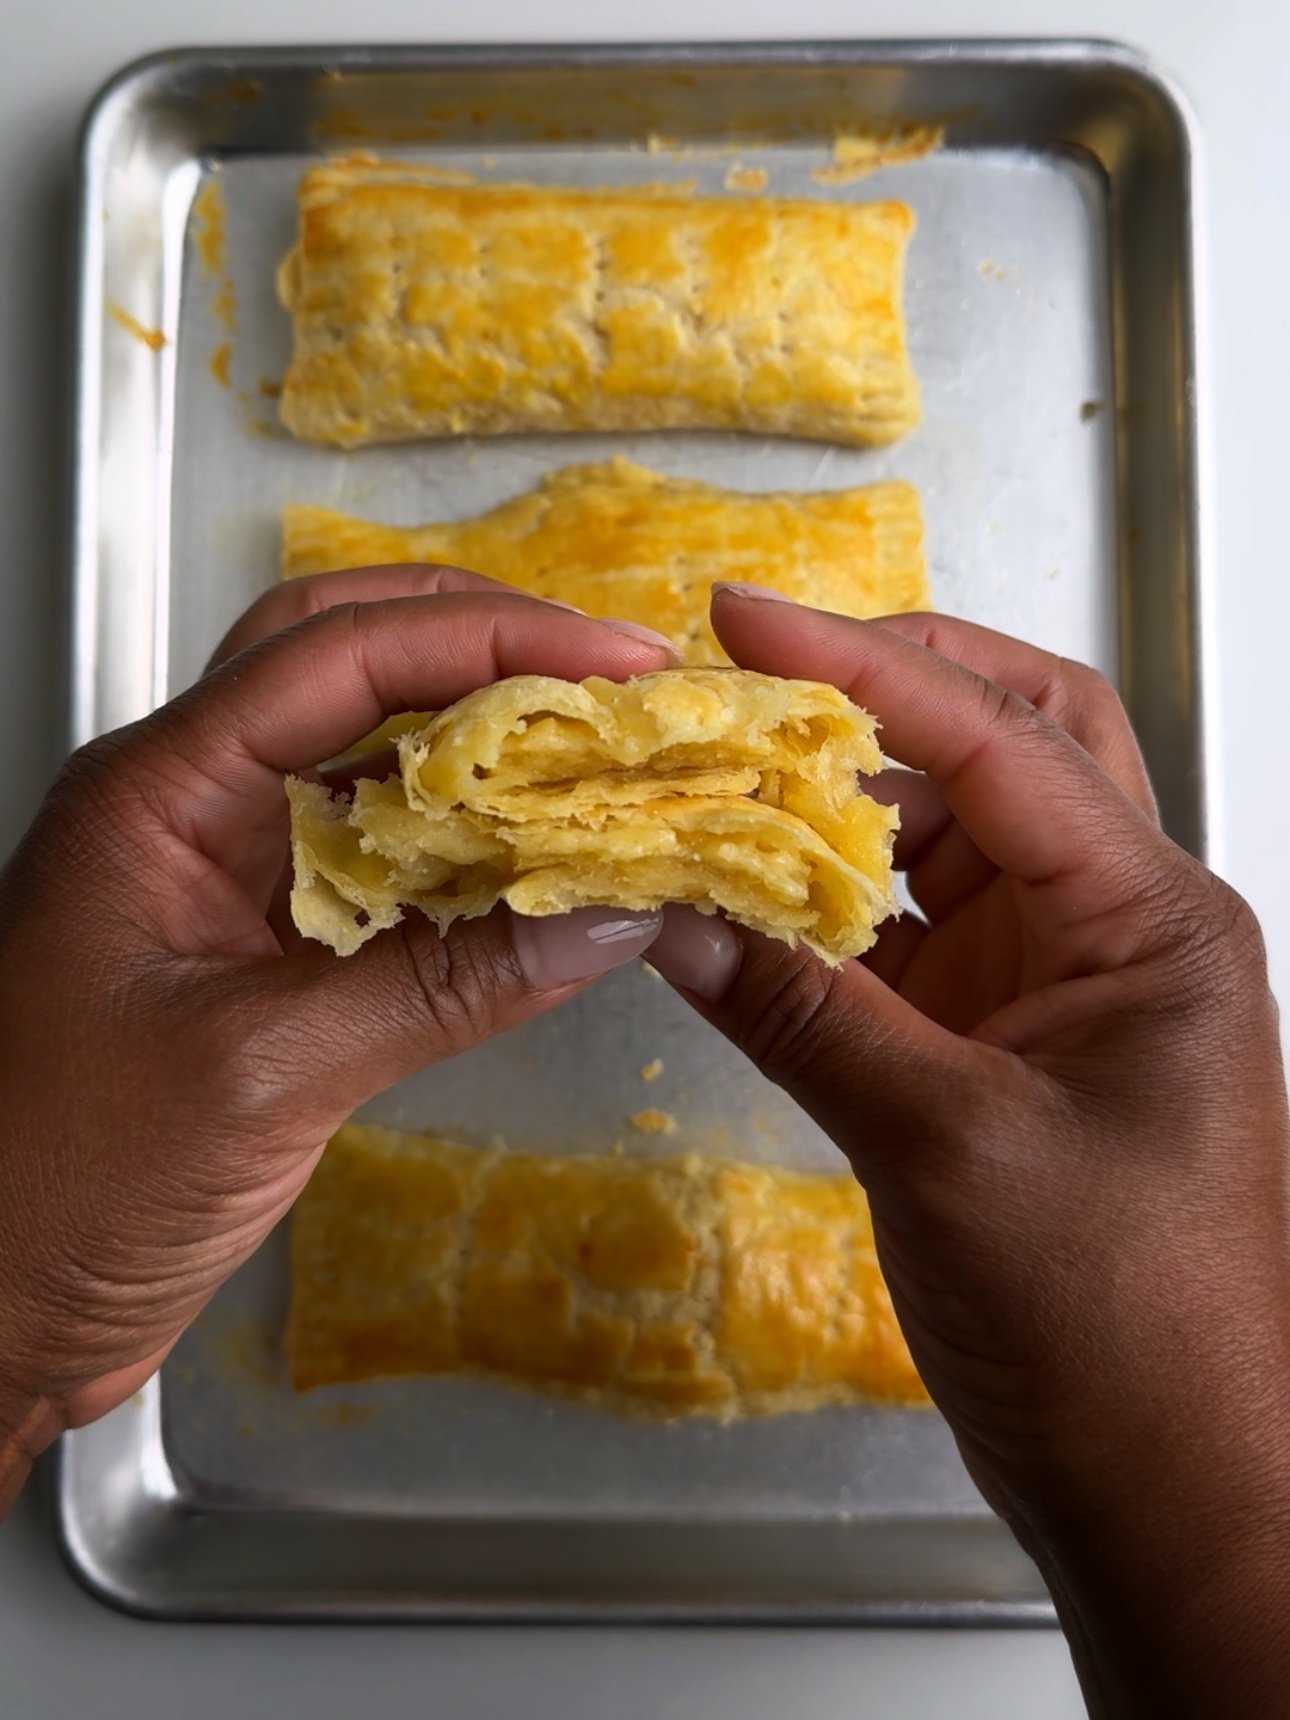 Cross section of a guyanese cheese roll showing all the flaky layers.